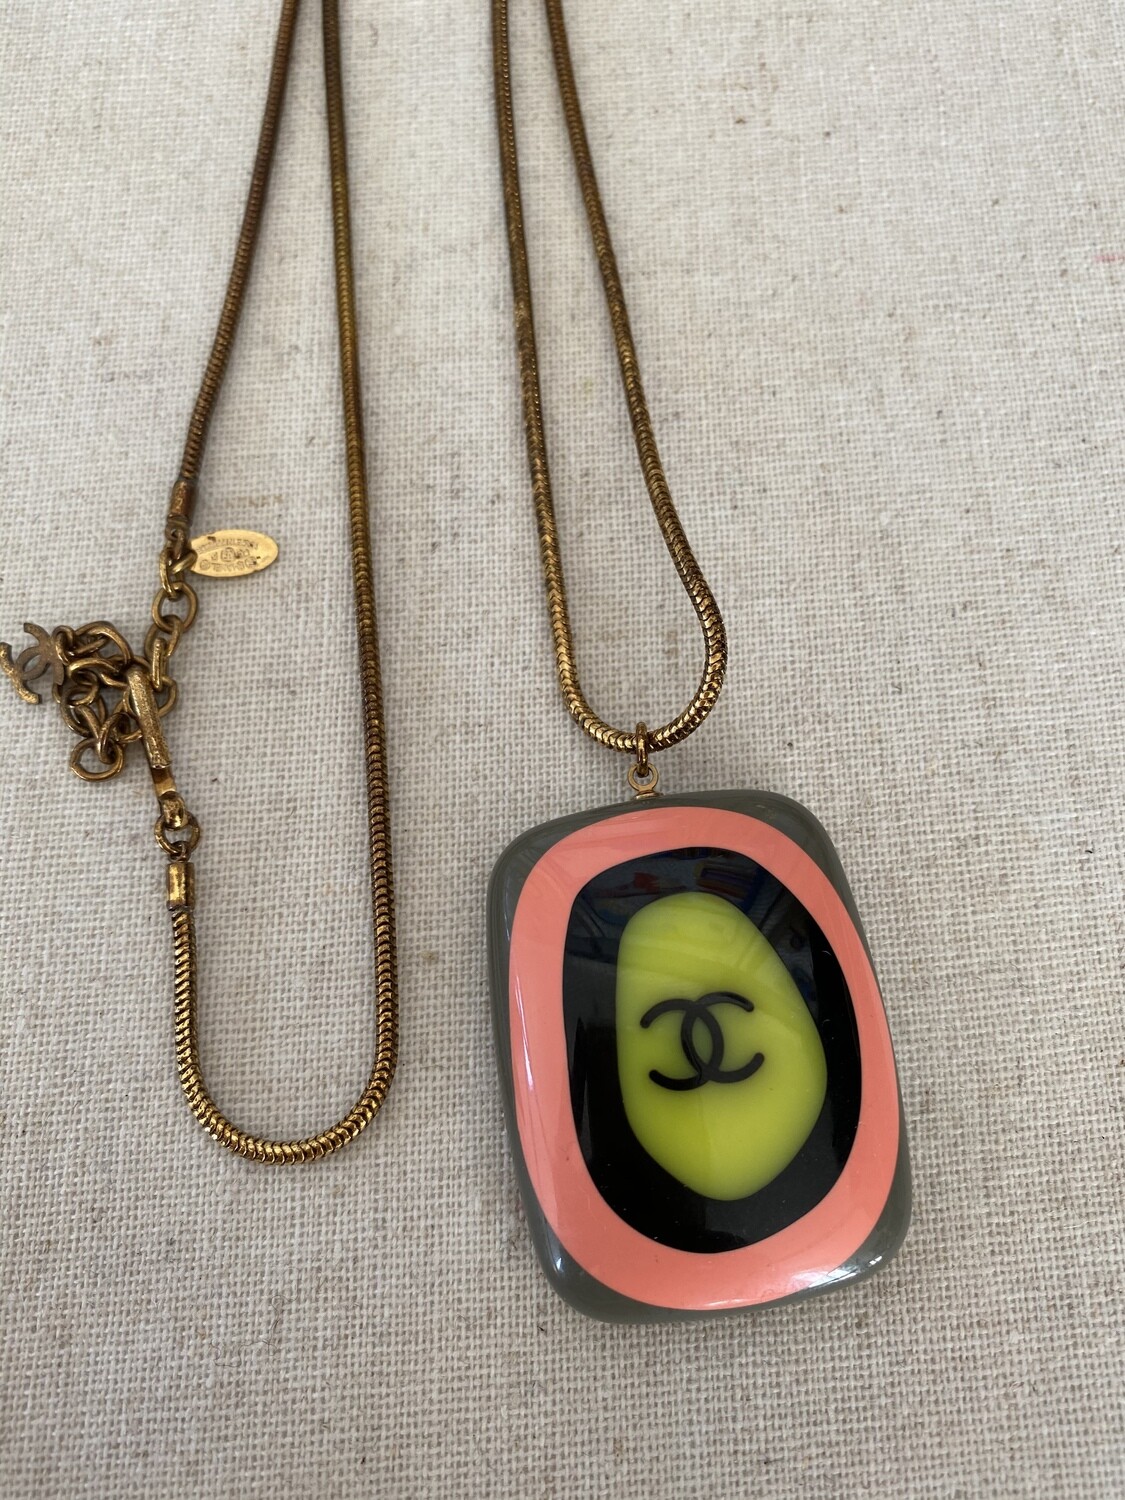 CHANEL CC LOGO LARGE RESIN PENDANT NECKLACE WITH GOLD CHAIN